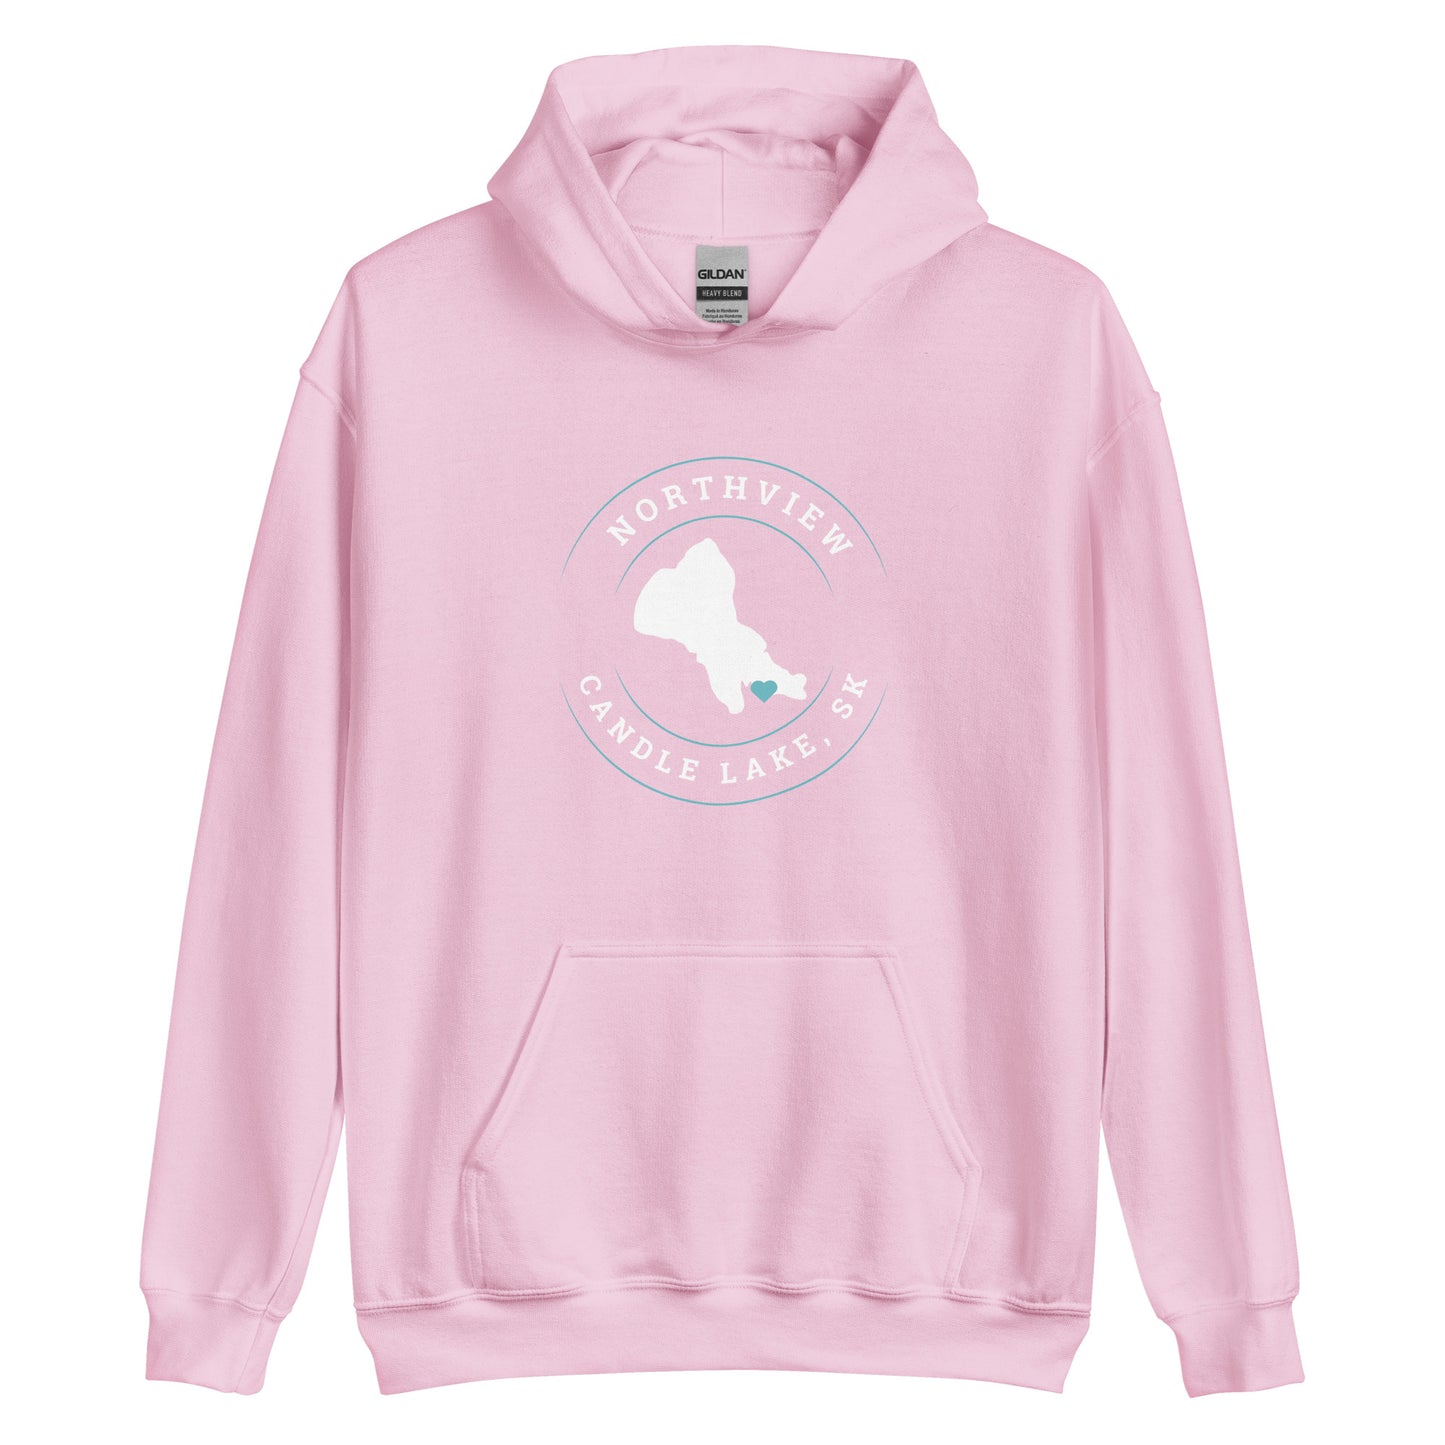 Candle Lake, SK - Unisex Hoodie - Northview